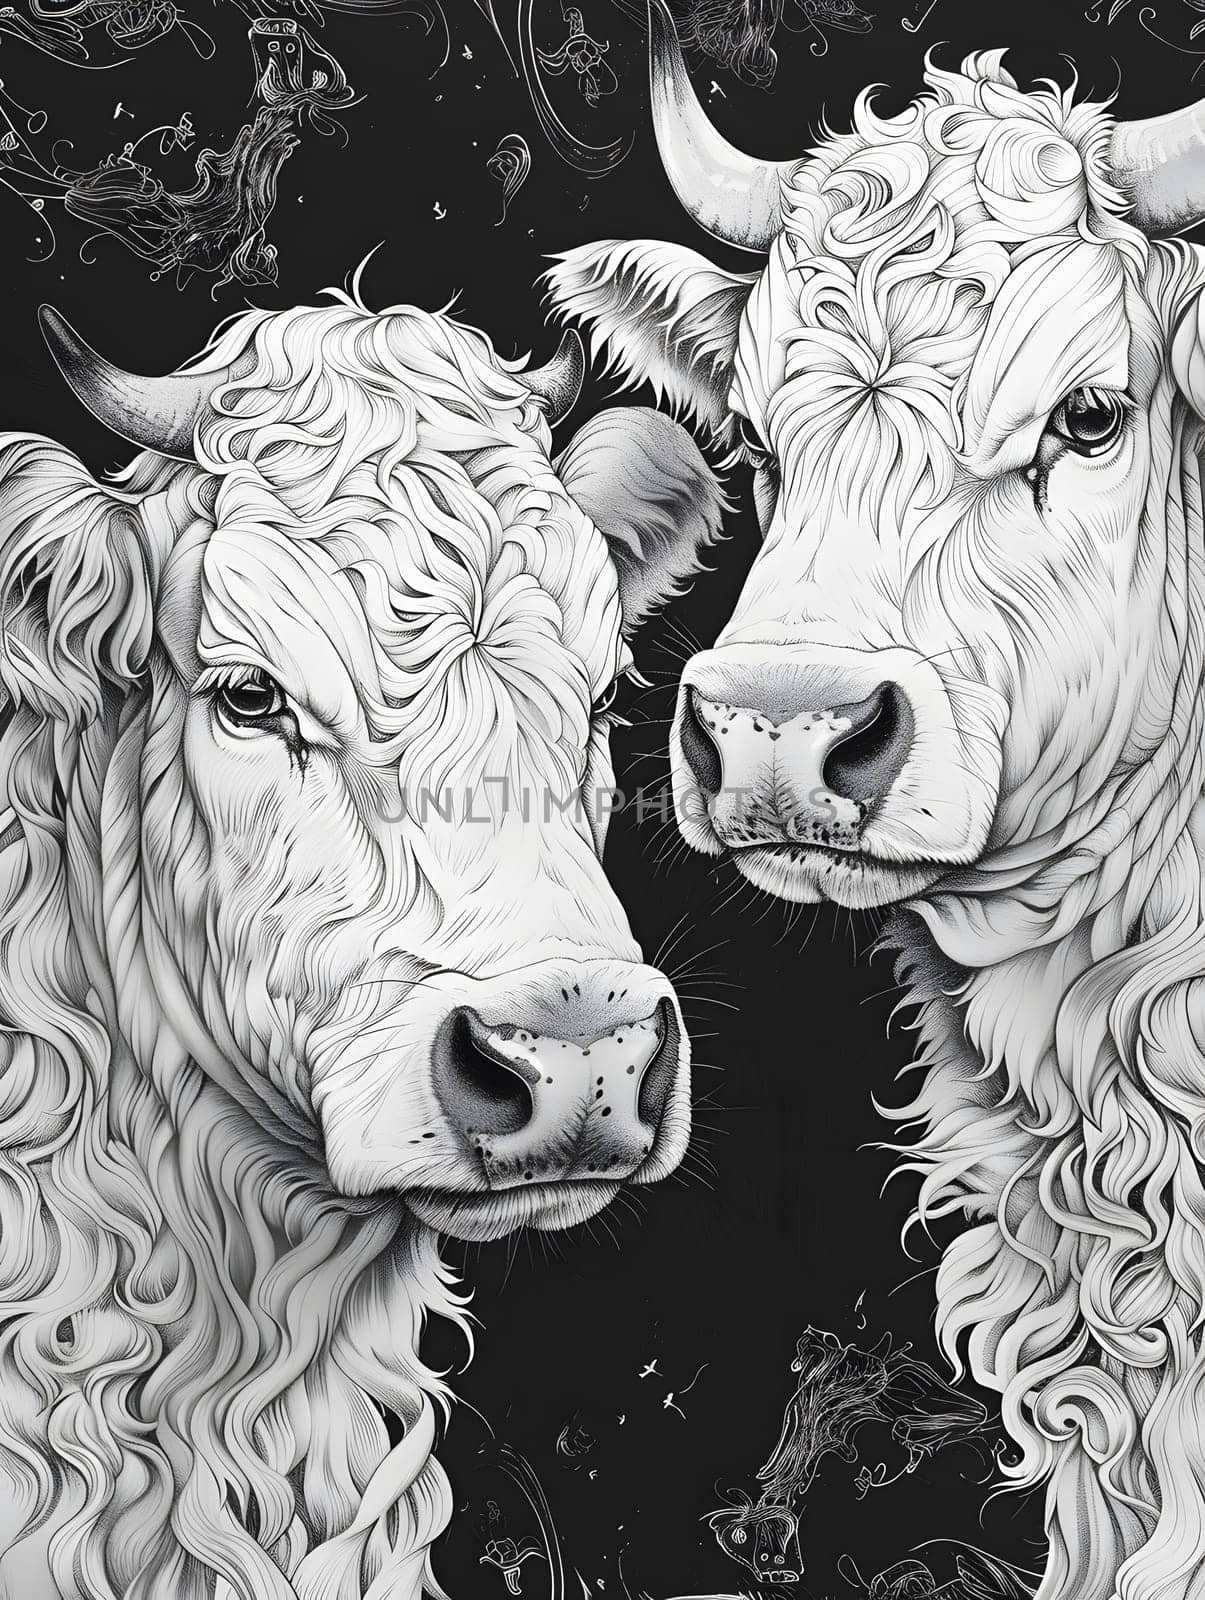 Photograph of two White bulls with horns in a classic art style by Nadtochiy